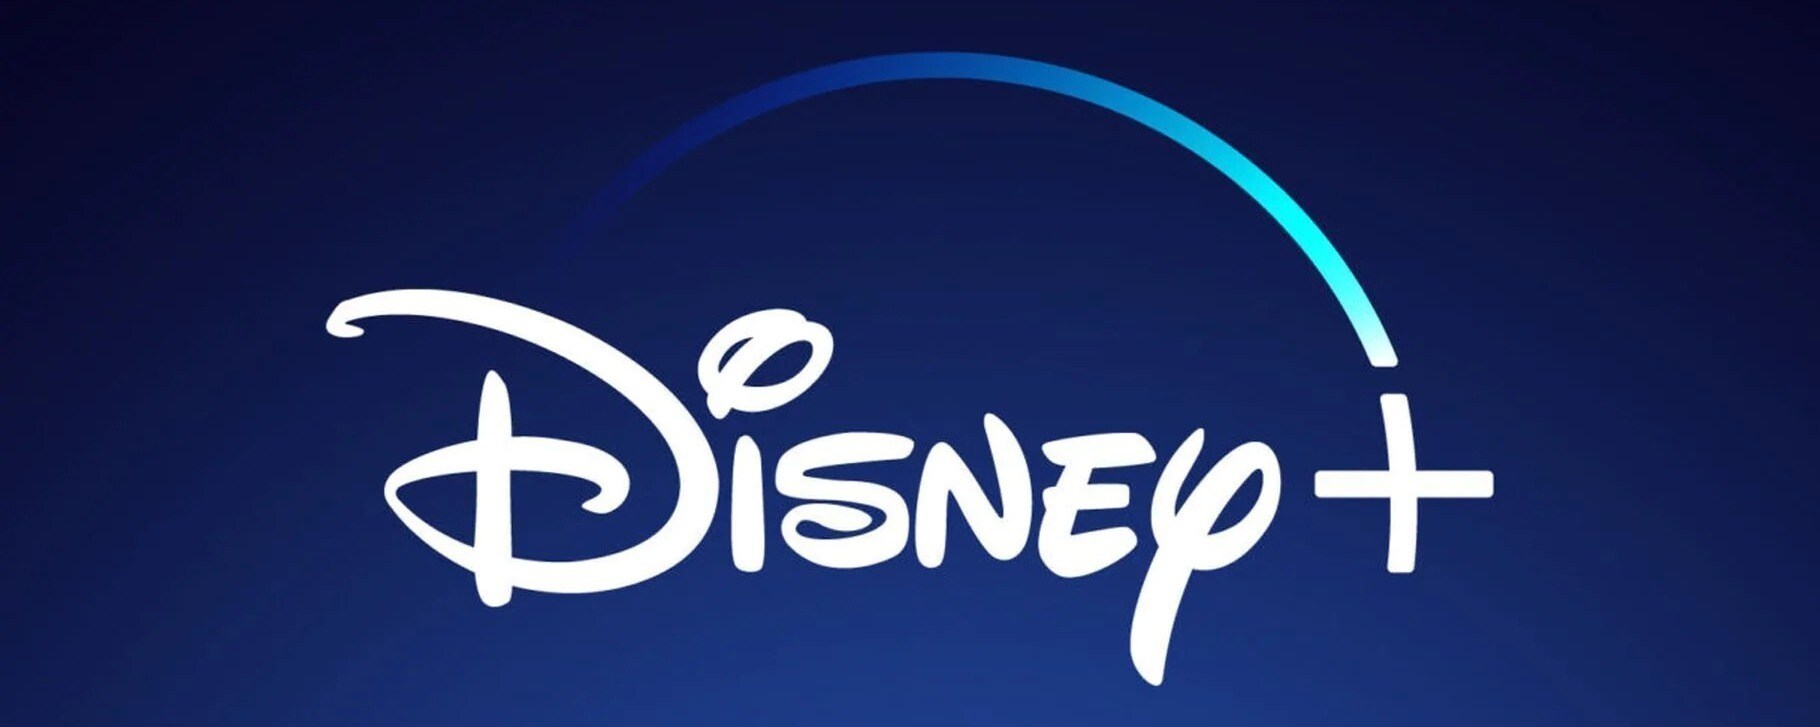 Disney+ Set to Launch in the Netherlands and Canada on November 12th and Australia and New Zealand November 19th 